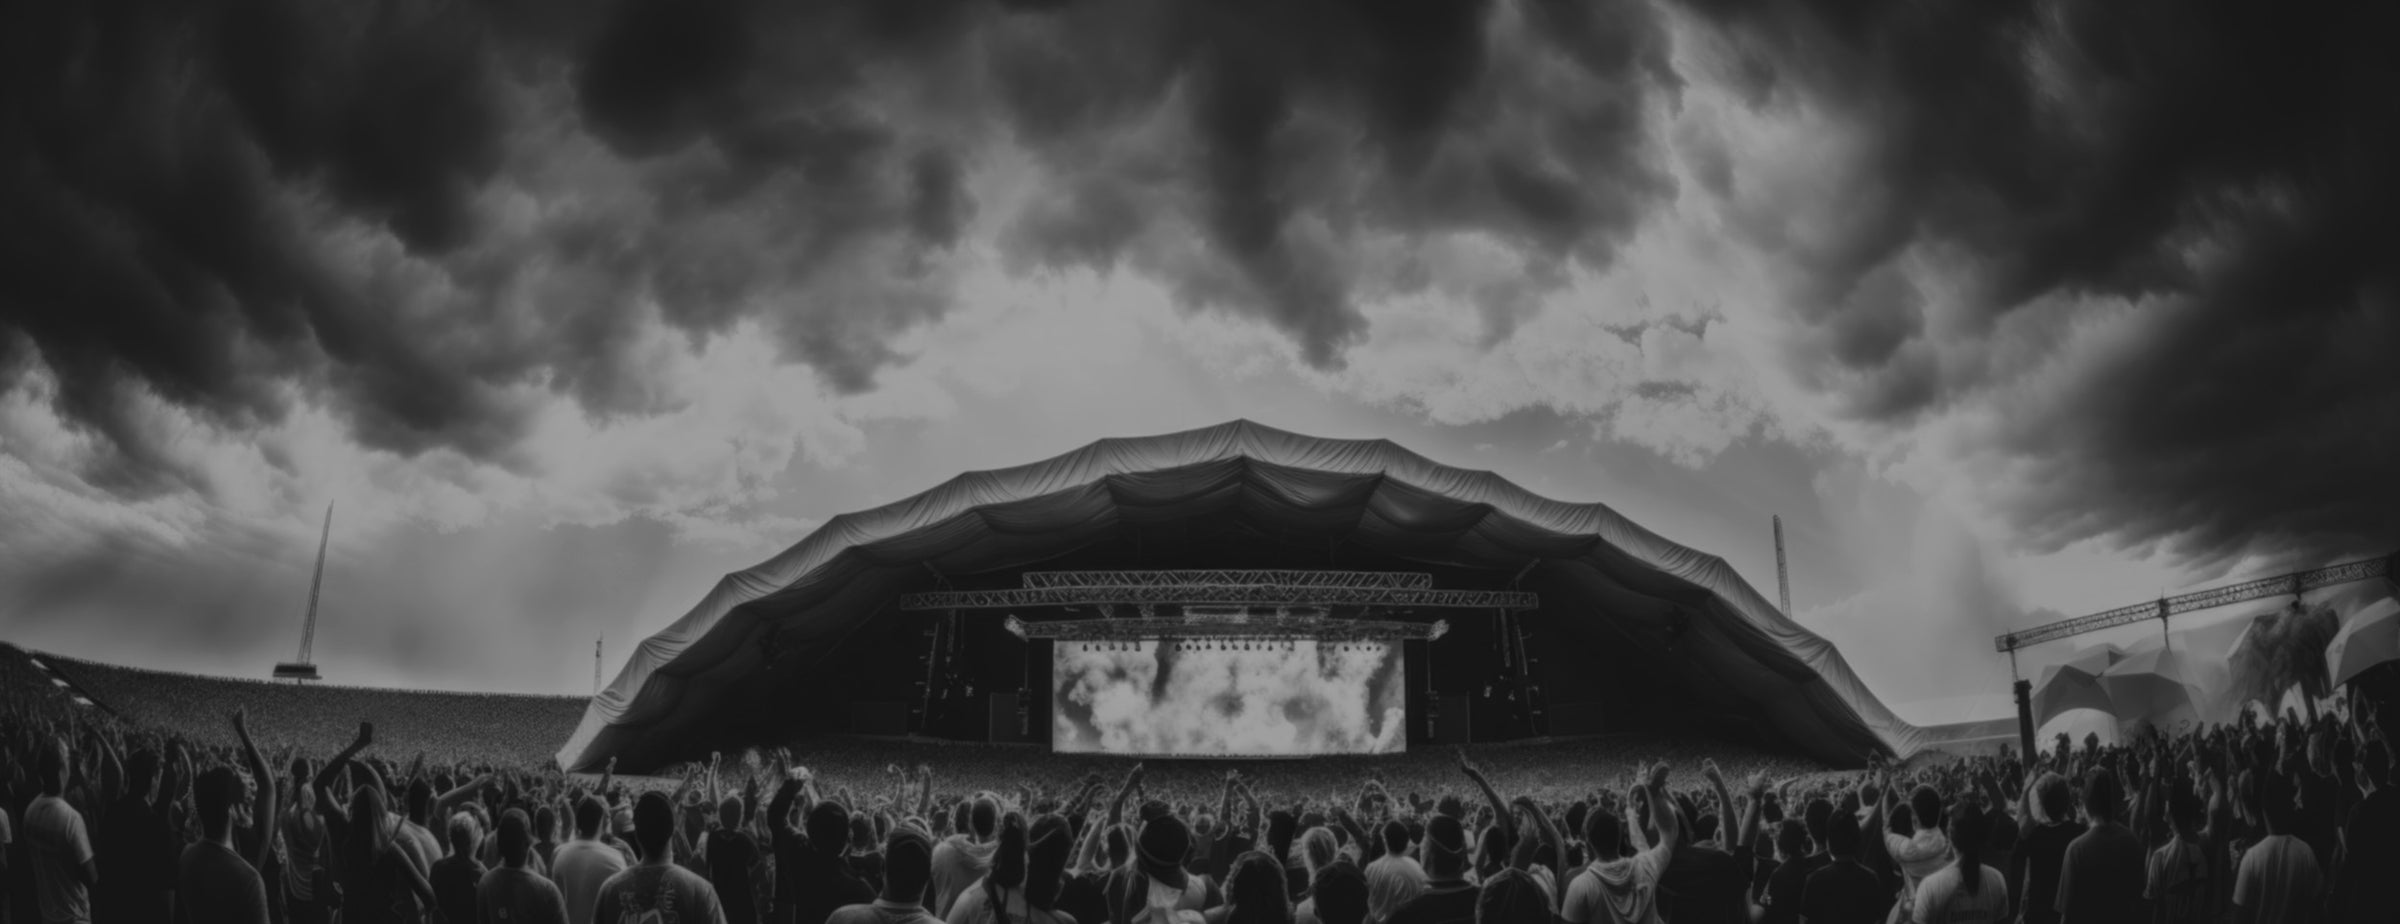 Crowd of concertgoers enjoying an outdoor music event under a large stage tent with dramatic clouds overhead